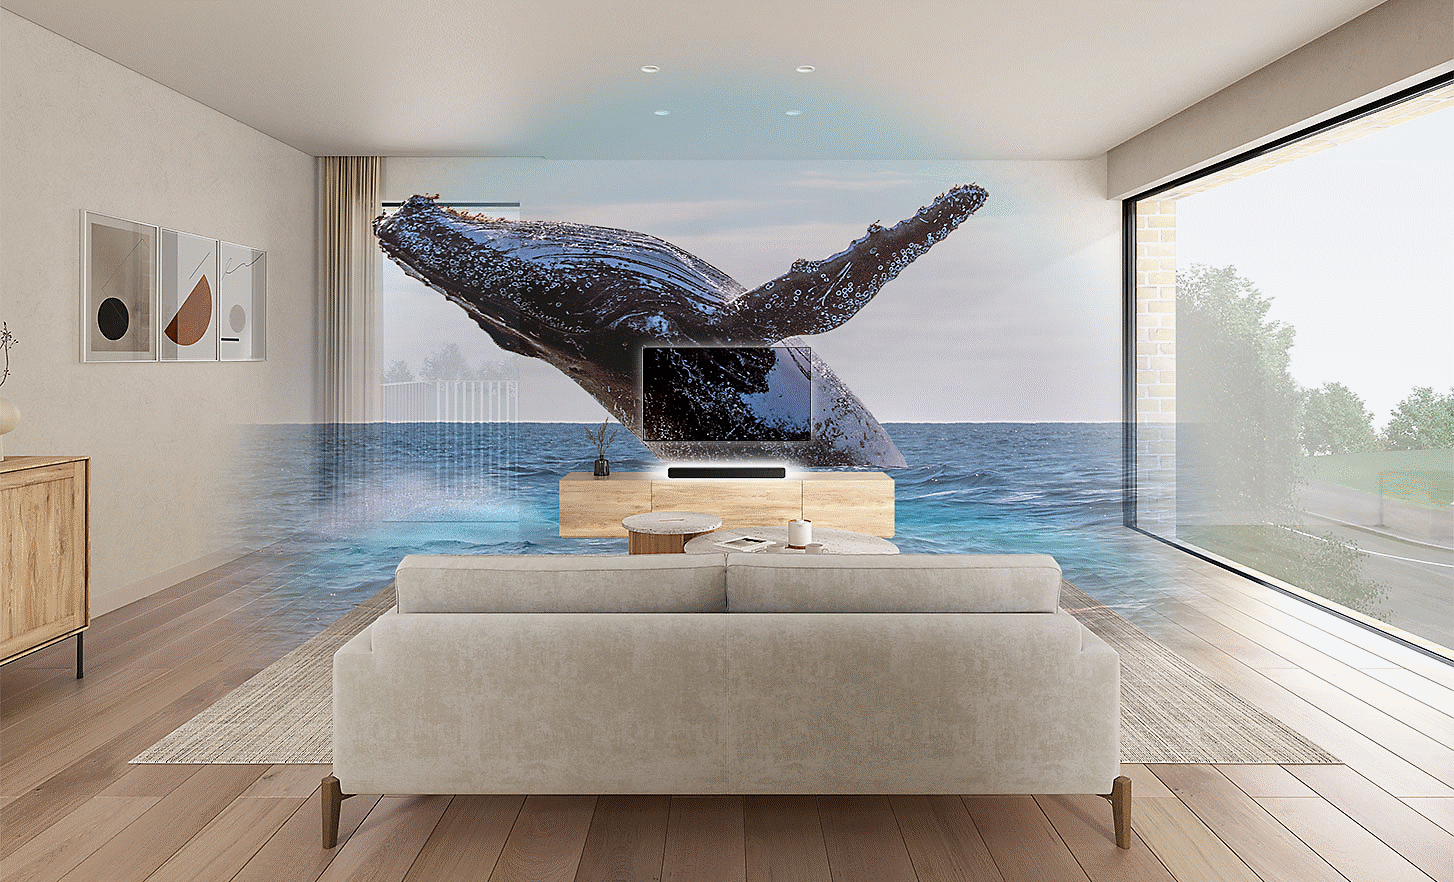 Image of a living room with a TV and HT-S2000 sound bar in the middle, a watermarked image of a whale sits over the top